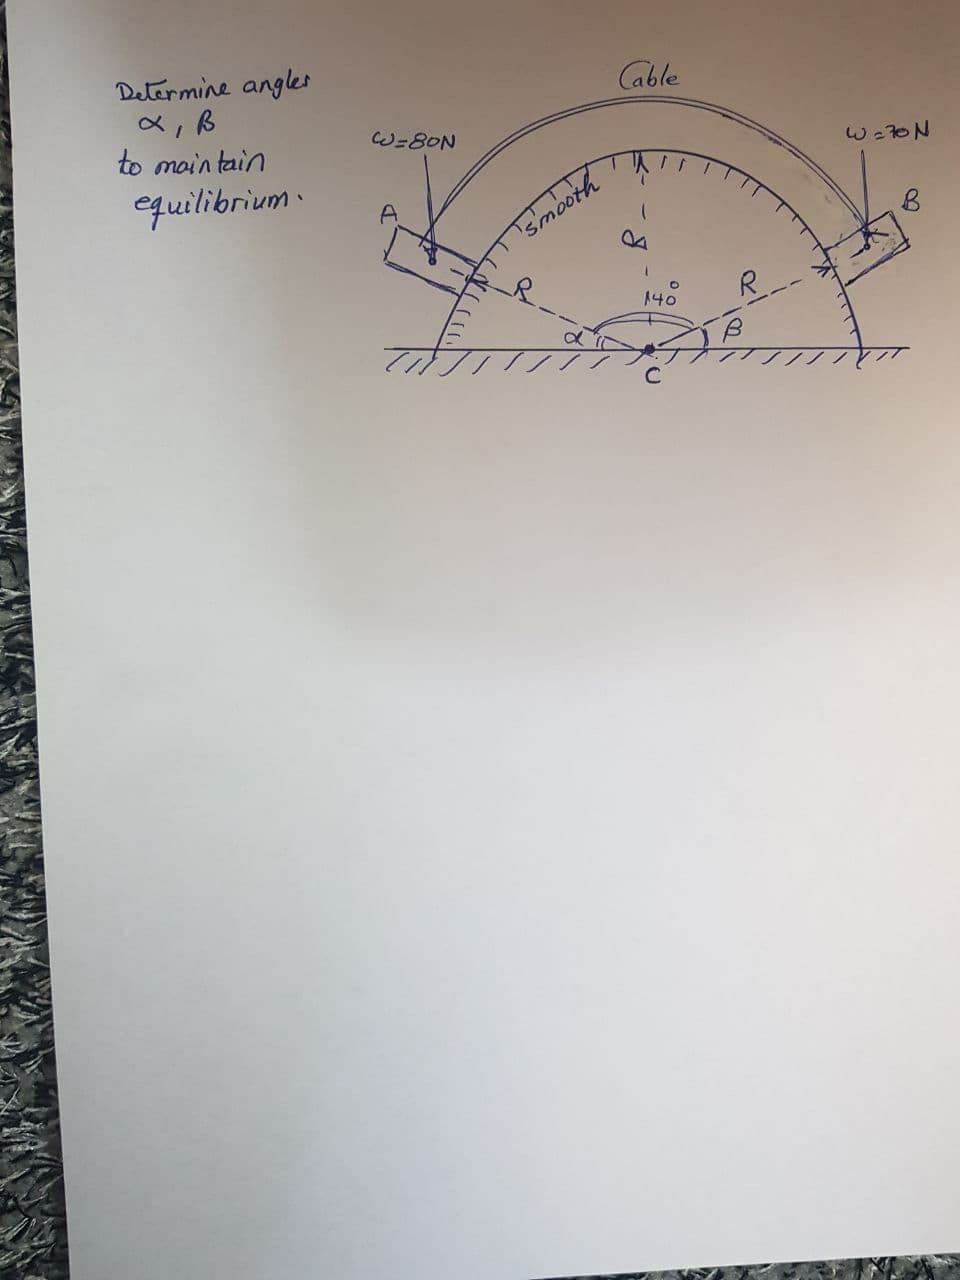 Determine angles
Cable
to main tain
W=8ON
equilibrium.
A.
smooth
R
140
